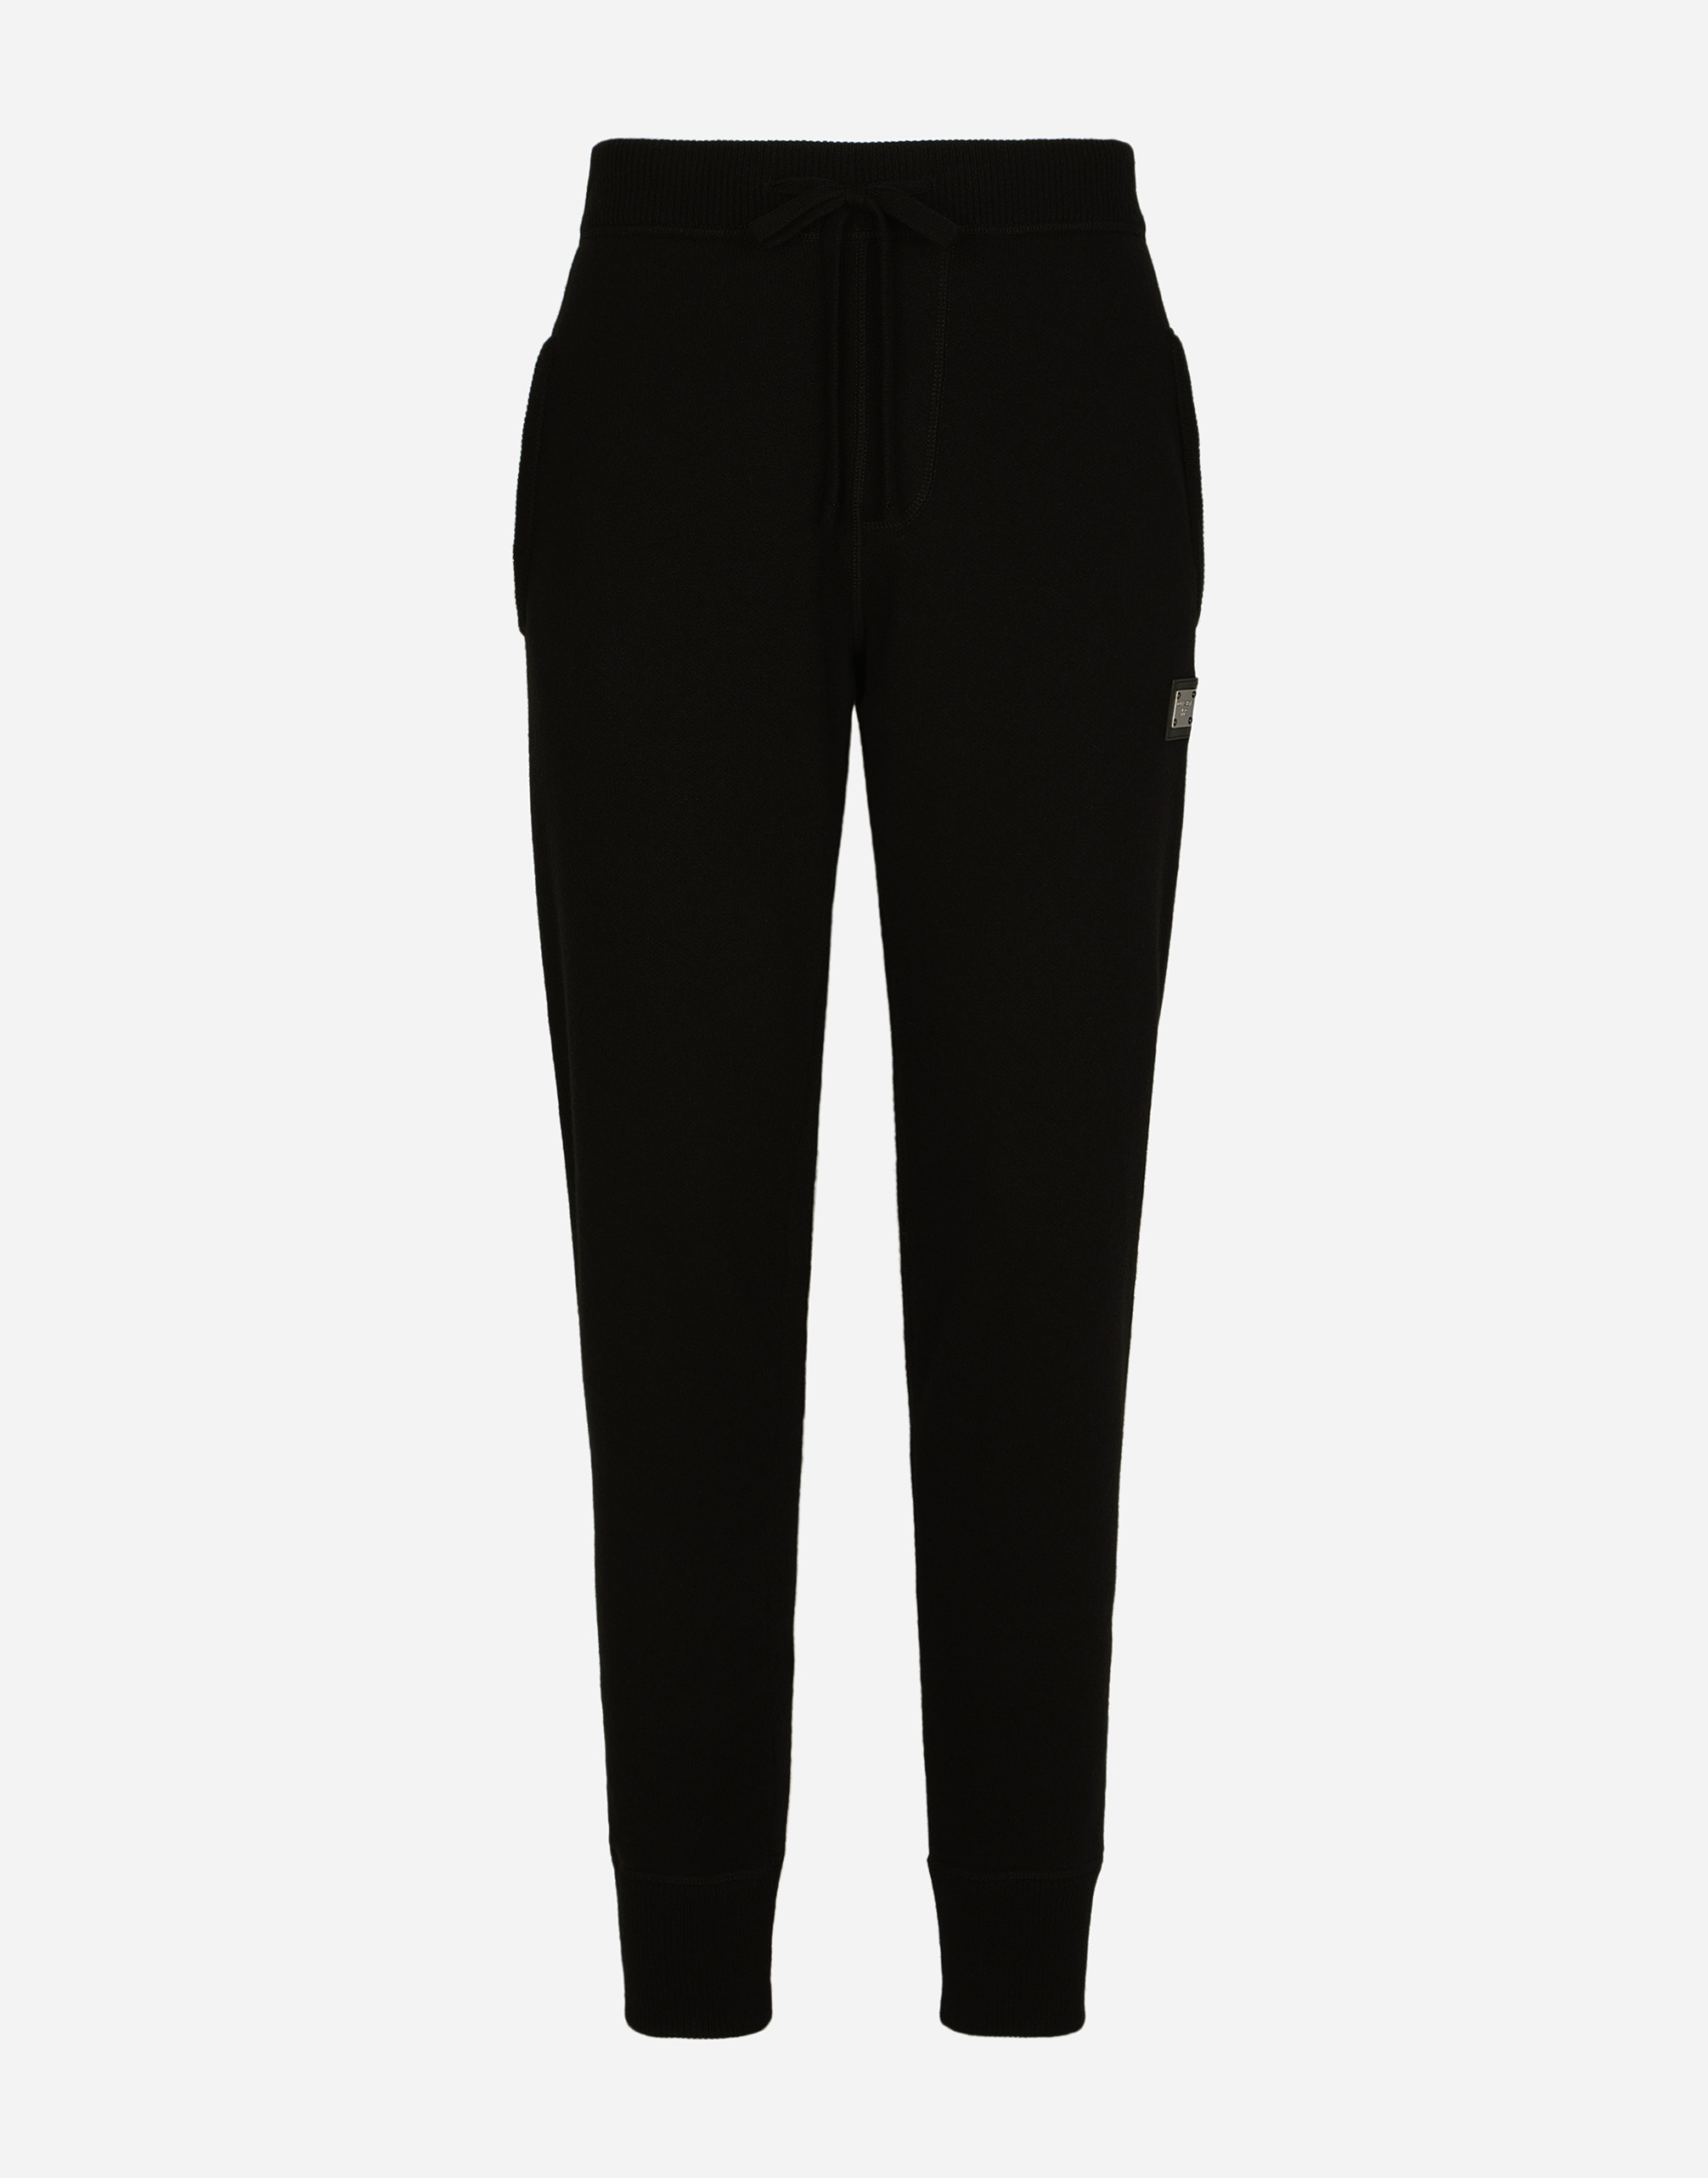 Dolce & Gabbana Wool And Cashmere Knit Jogging Pants In Black